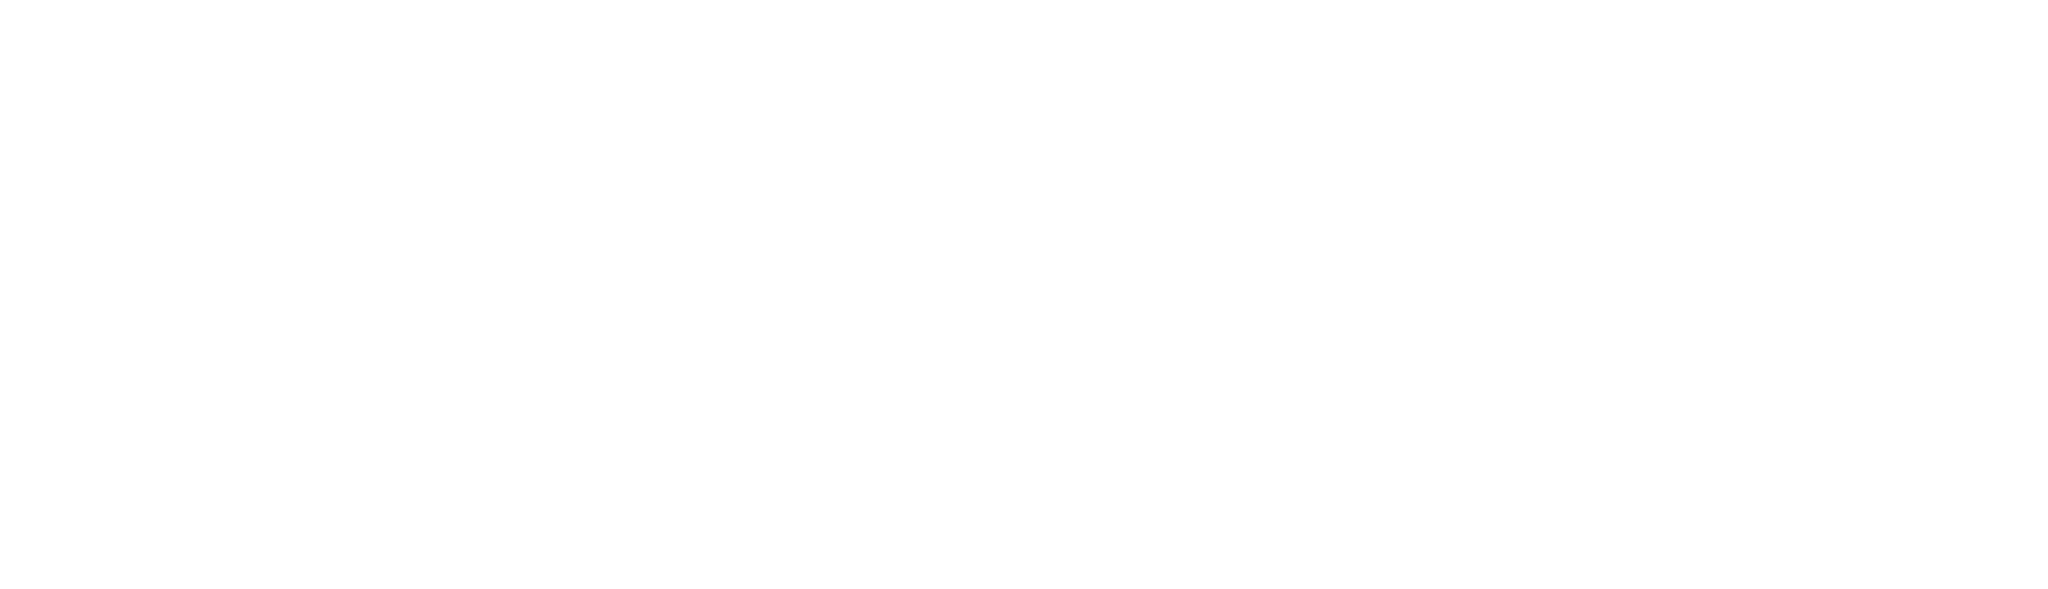 Your Western Garfield County Chamber of Commerce logo